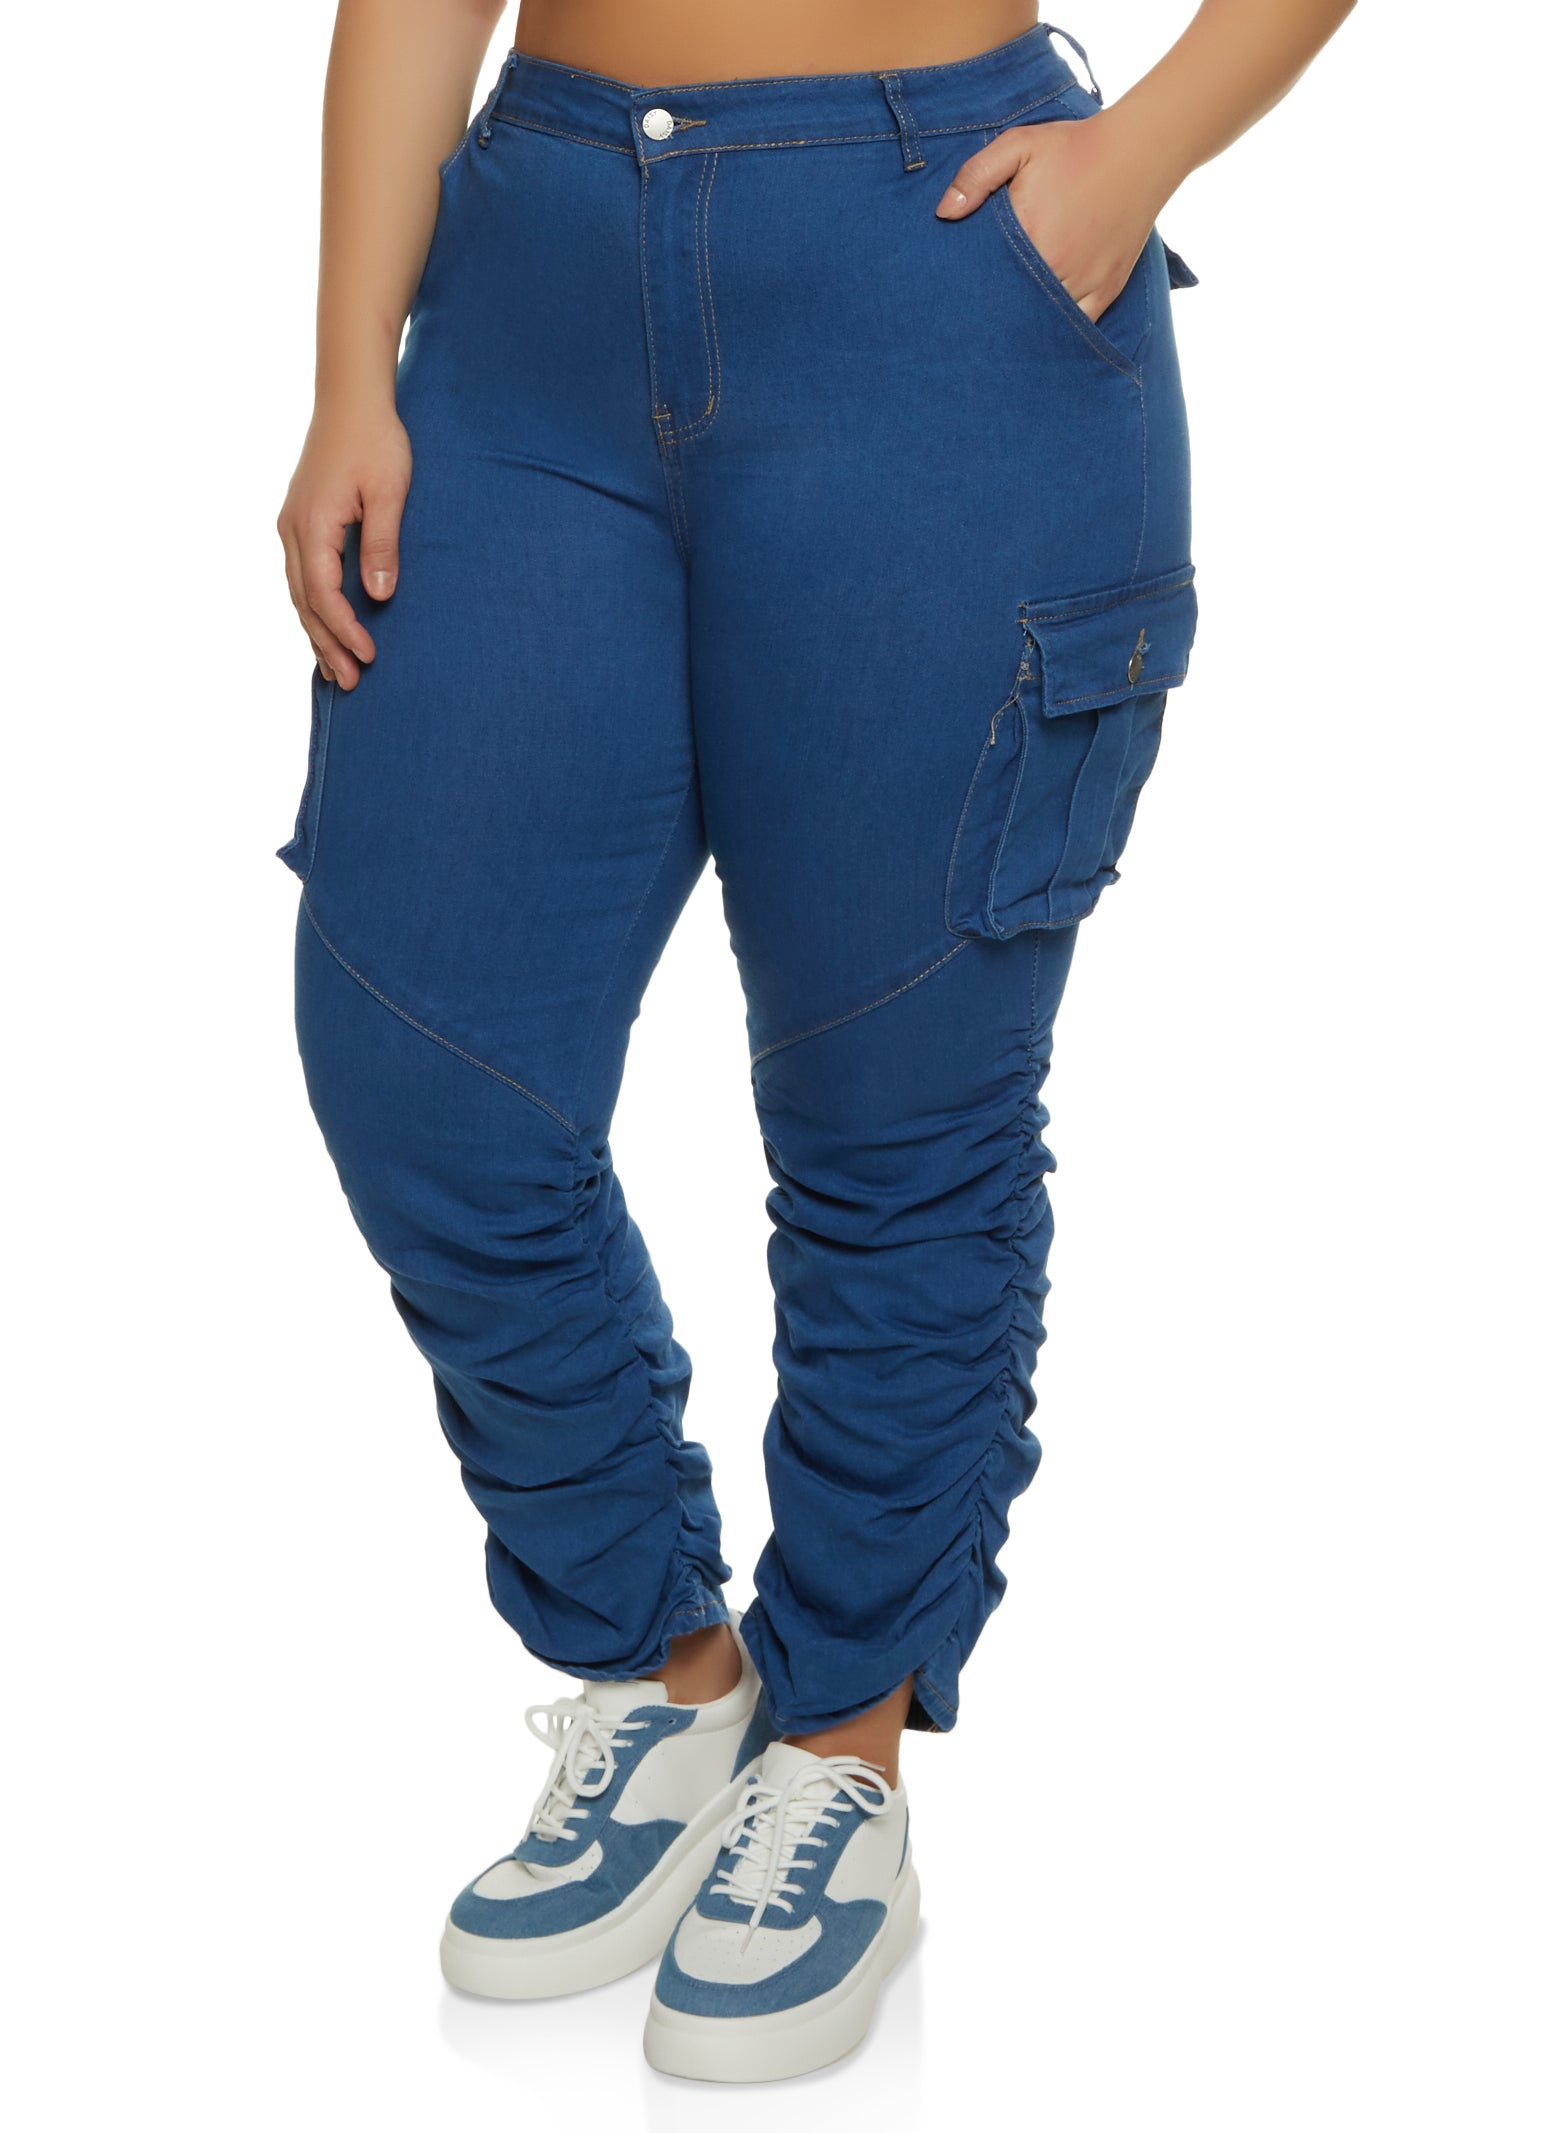 materiale overdraw Overleve Plus Size Jeans for Women | Everyday Low Prices | Rainbow